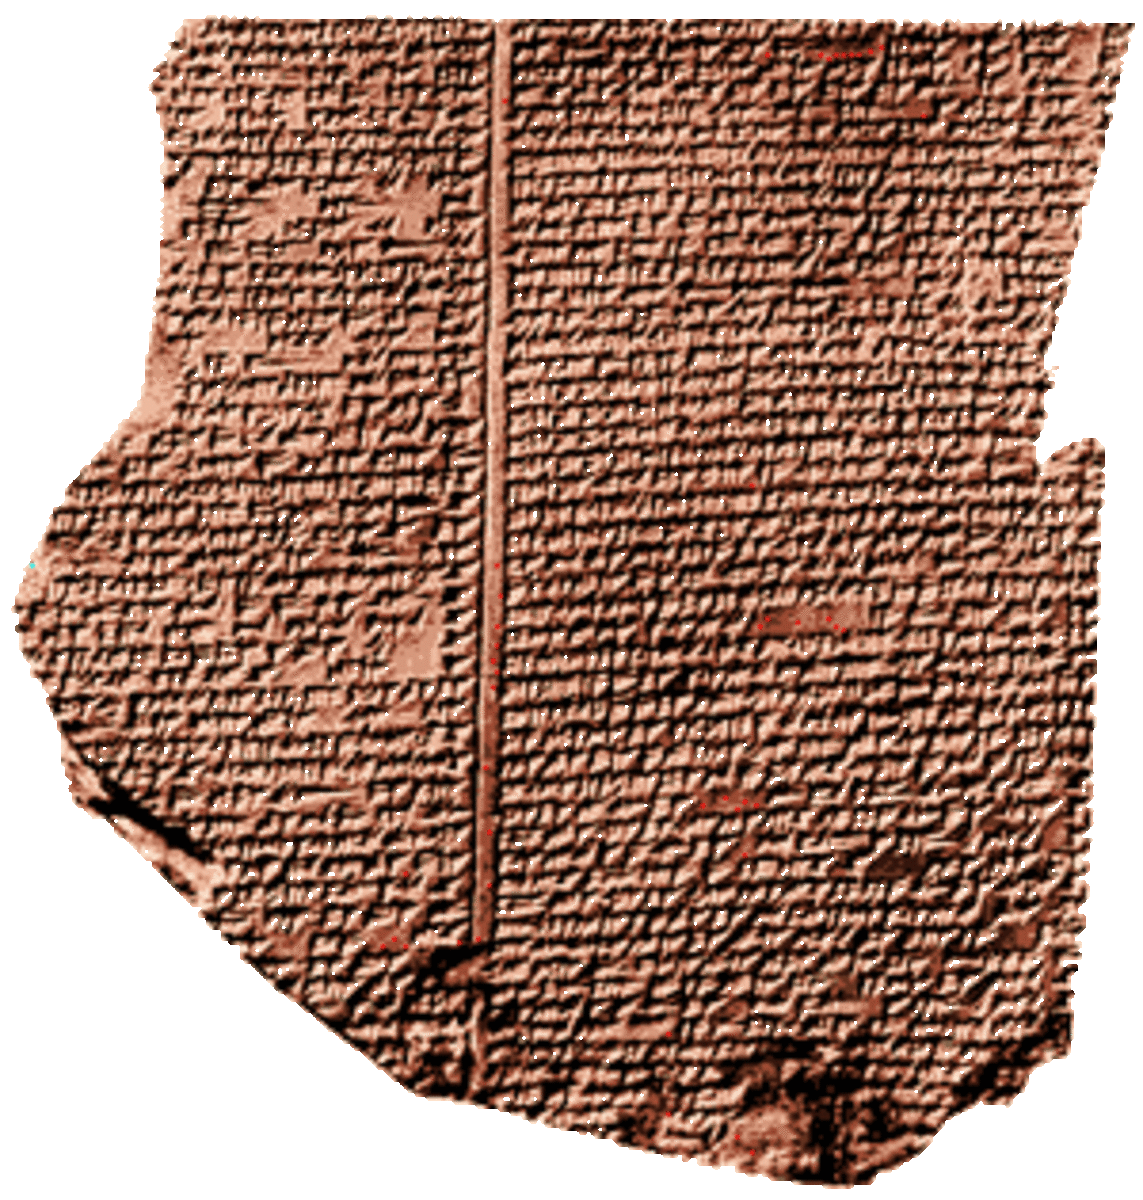 The Epic of Gilgamesh, the earliest known piece of narrative literature, as written on clay tablets in 2750 bc